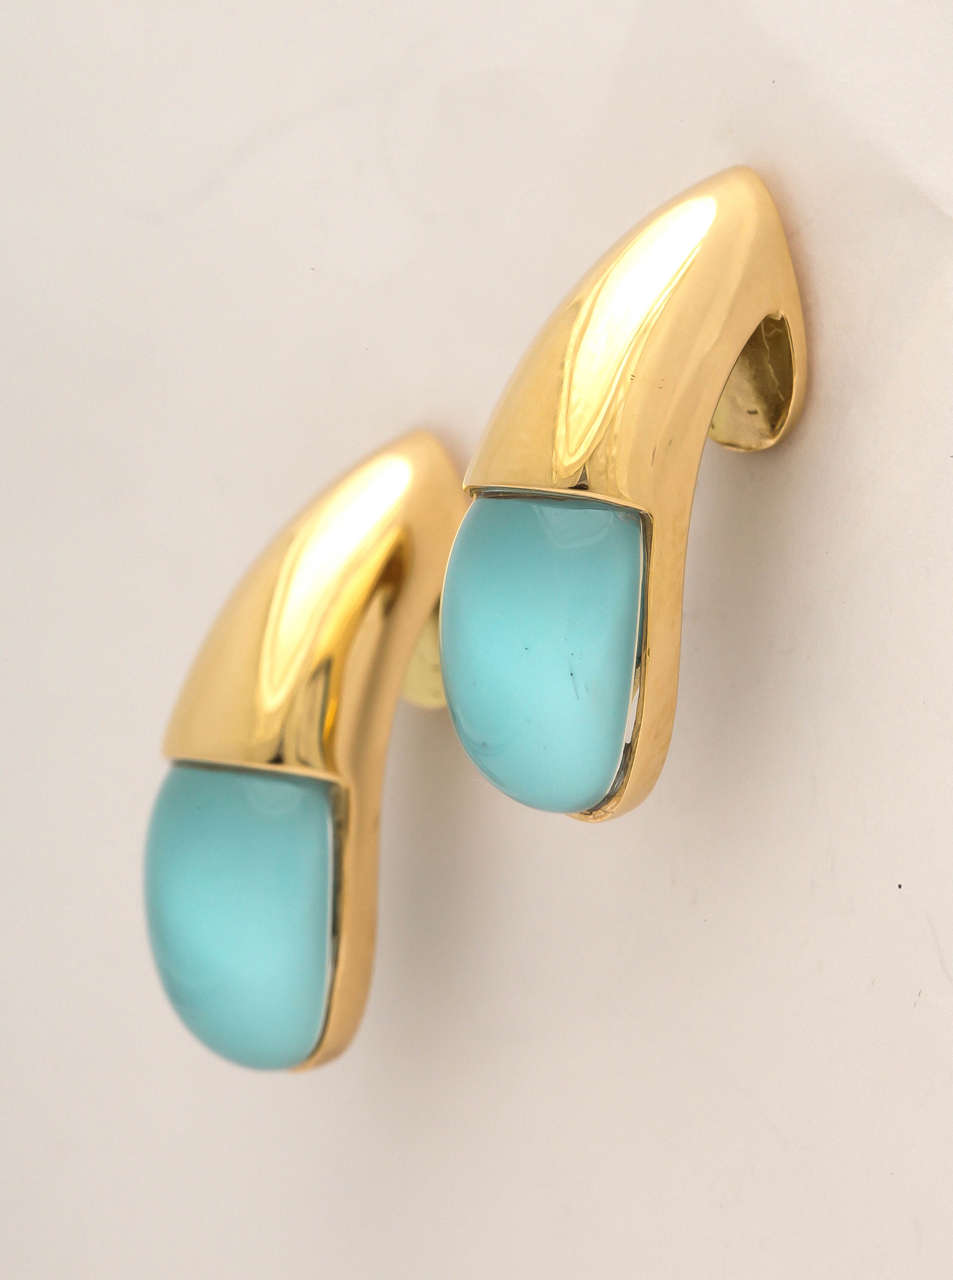 Modern Faraone Mennella Gocce Cabochon Turquoise Gold Earrings For Sale